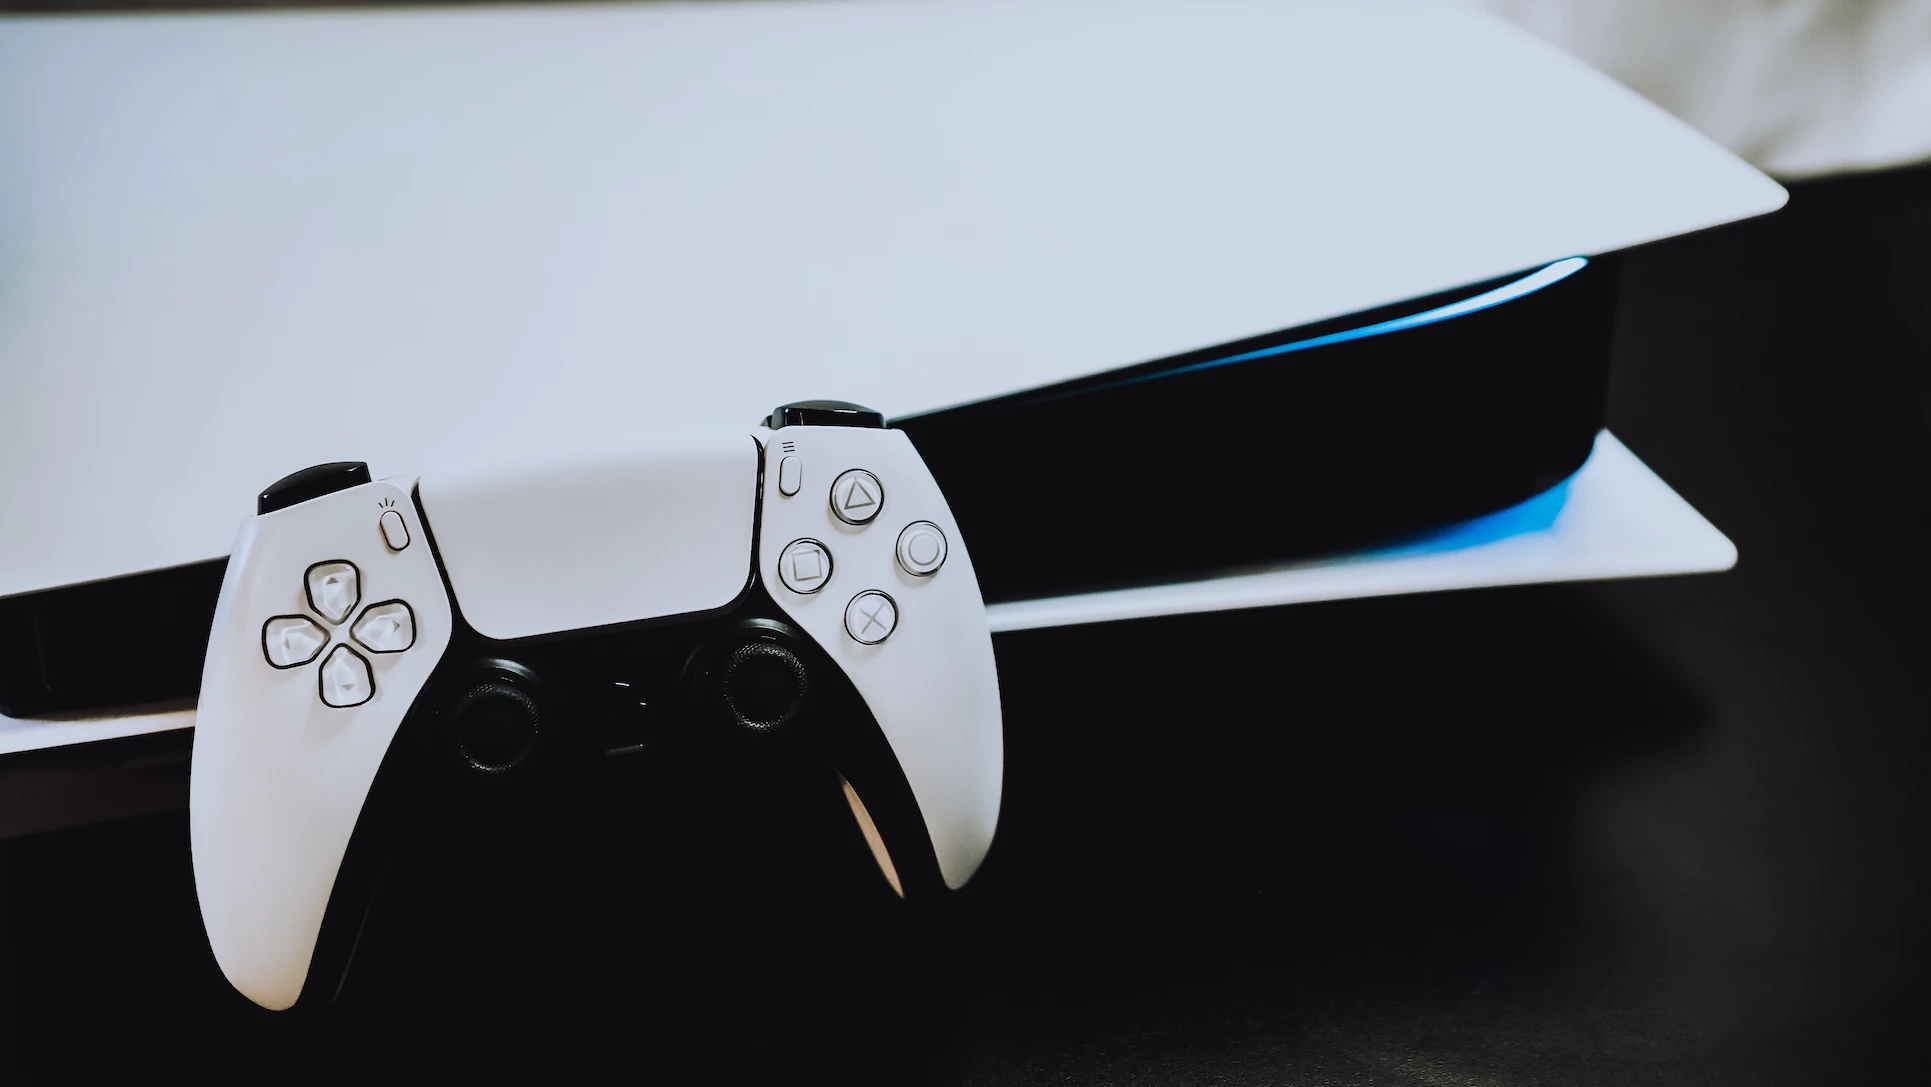 PlayStation 5 Slim Release Date, Price, and Potential Portable Version